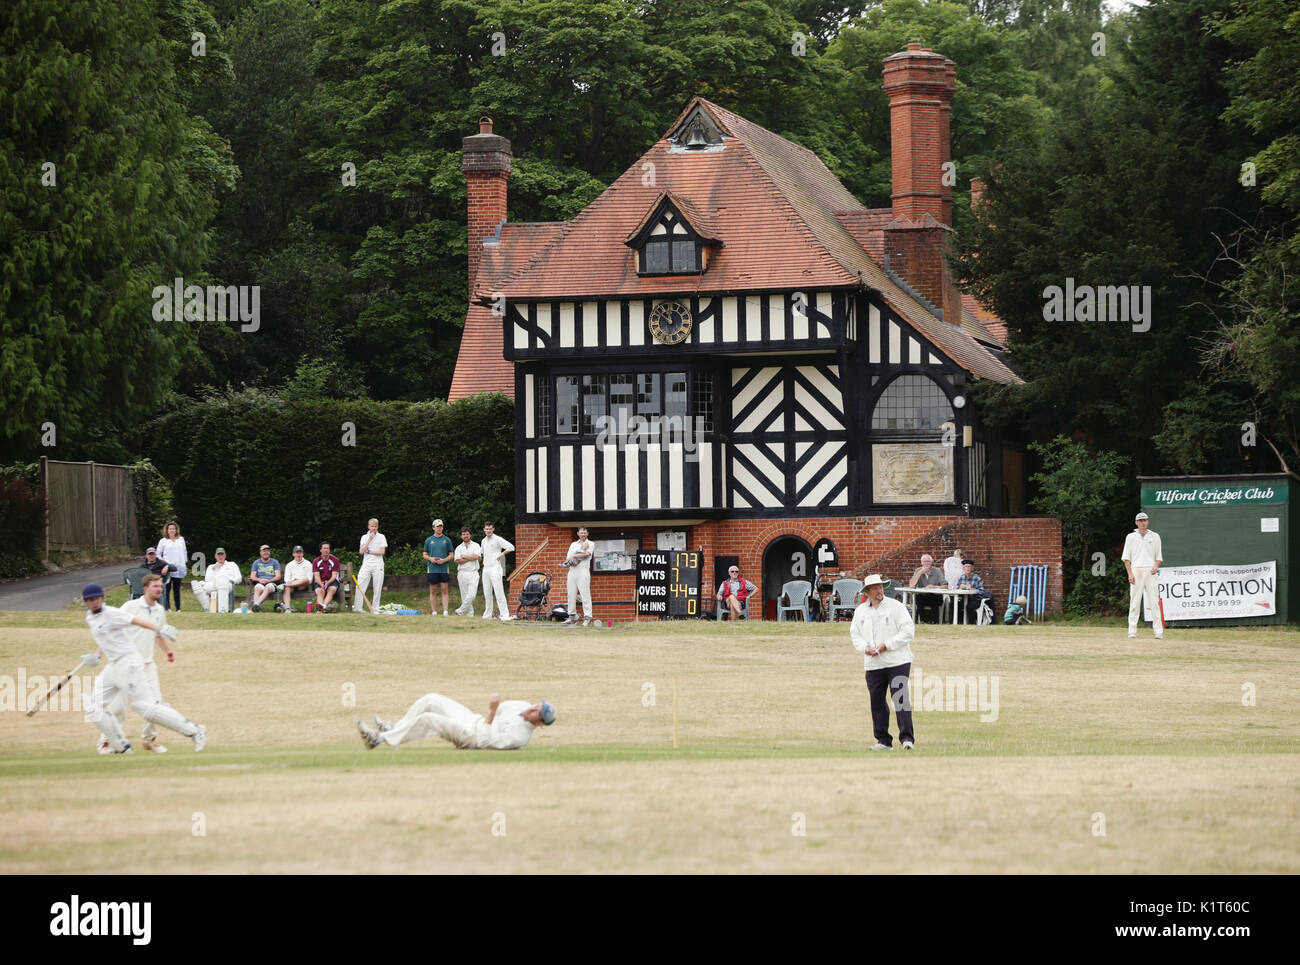 A village cricket match between Tilford and Grayswood is played on the green in Tilford, Surrey, on Saturday July 15, 2017 Stock Photo